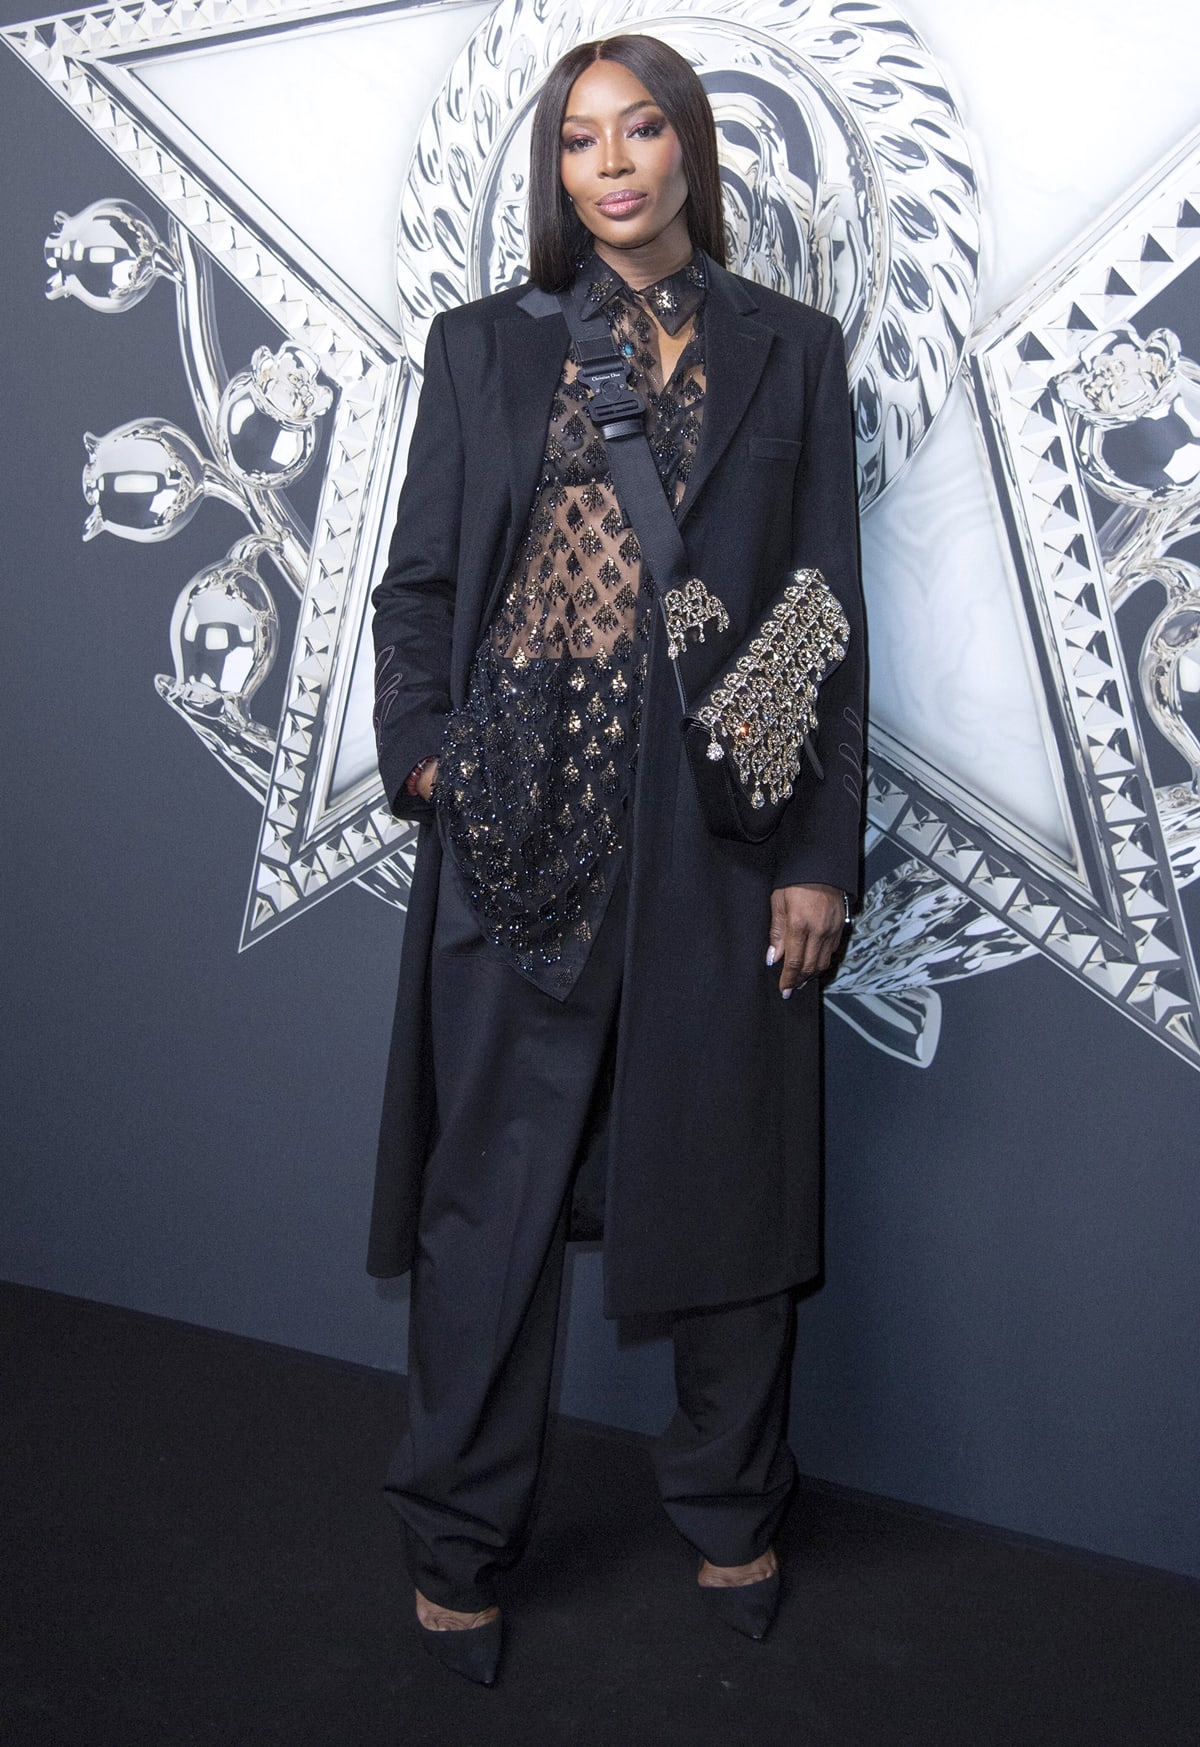 Naomi Campbell attends the Dior Homme Fall/Winter 2022/2023 show